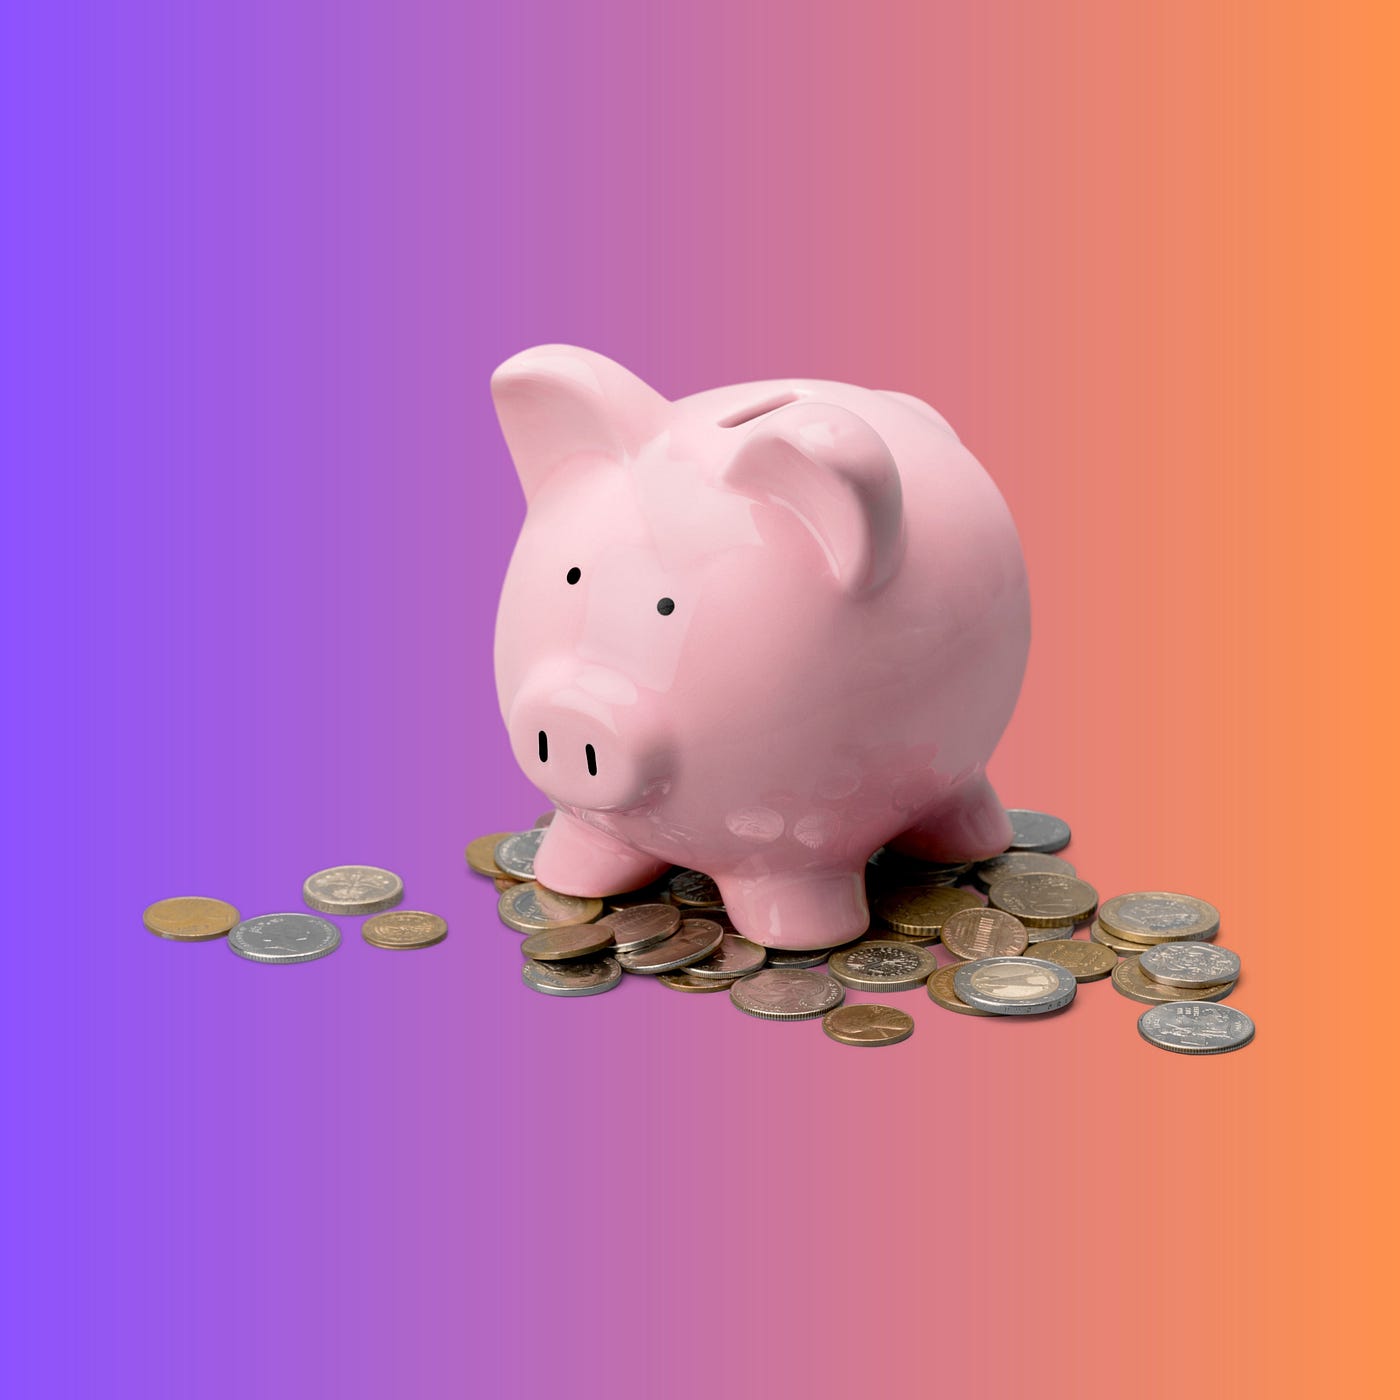 The Tale of the Piggy Bank: How the Pig Became the Symbol of Saving Money, by Weal